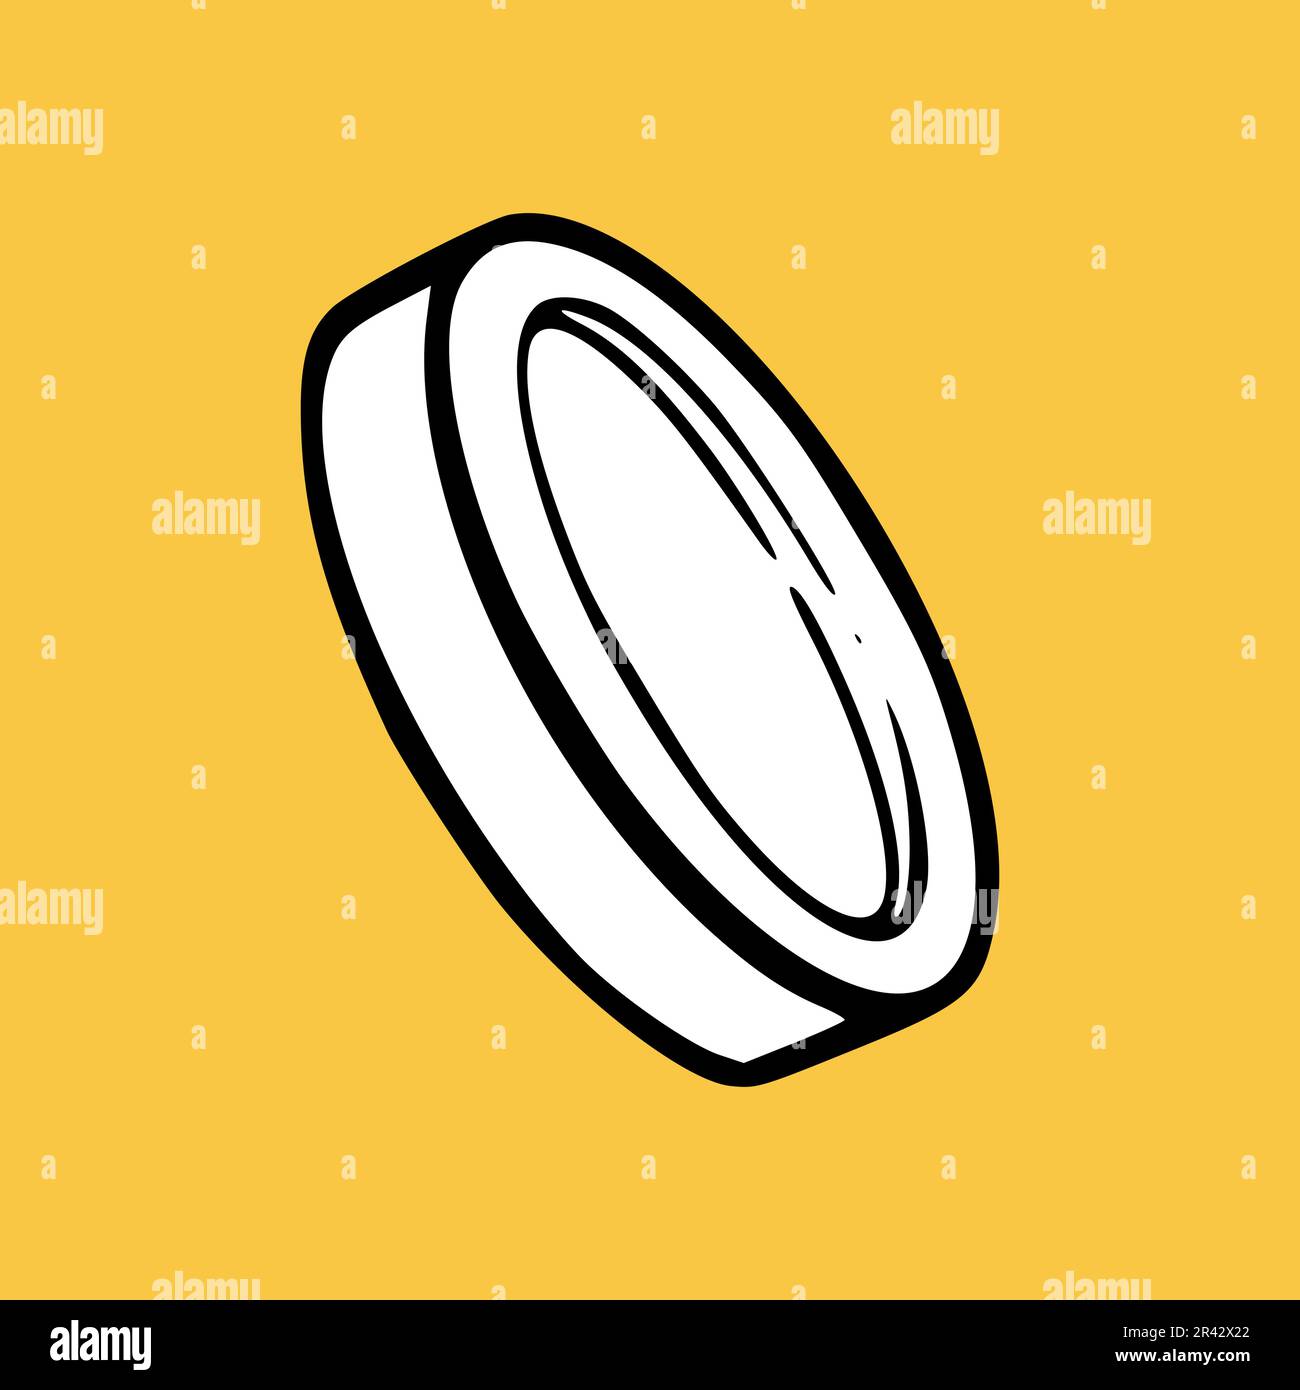 Falling coin sketch. Shiny metal coin in isometriv view. Vector illustration isolated in yellow background Stock Vector